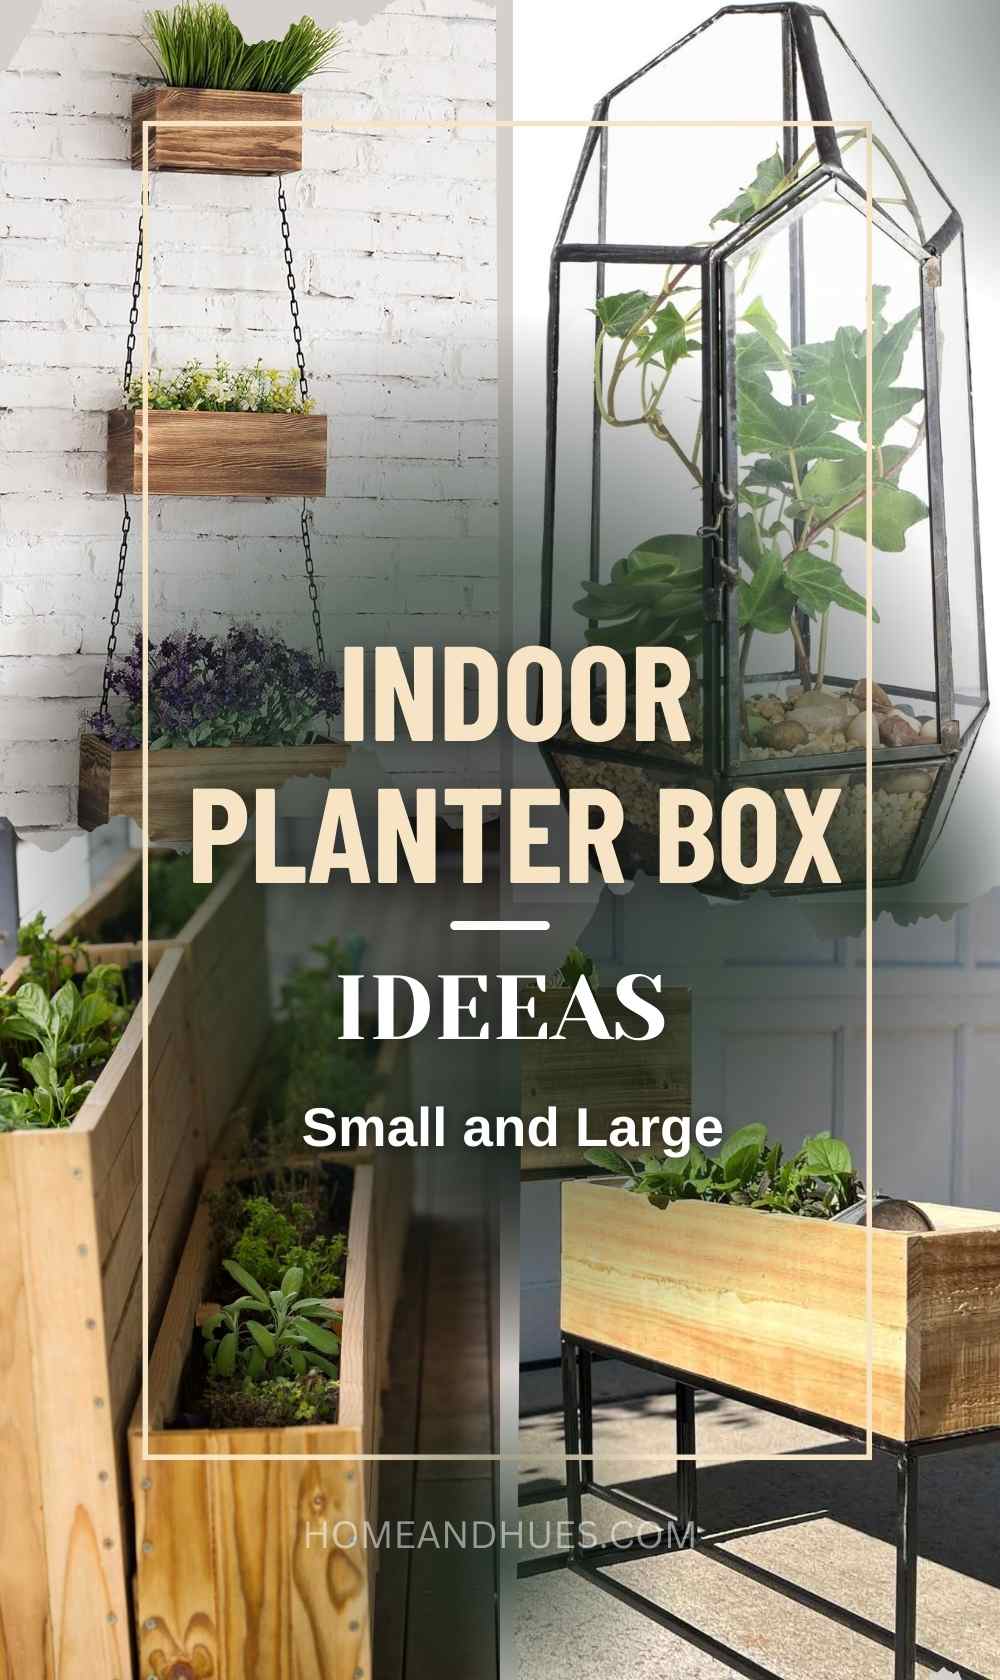 Indoor planter box ideas that are perfect for any home whether it's hanging, wall mounted or standing. From sleek, modern designs to cozy, rustic options, for every style and space size. These planter boxes can be both functional and stylish when indoors, helping you bring a little bit of the outdoors inside. Ready to find the perfect planter box for your indoor garden?